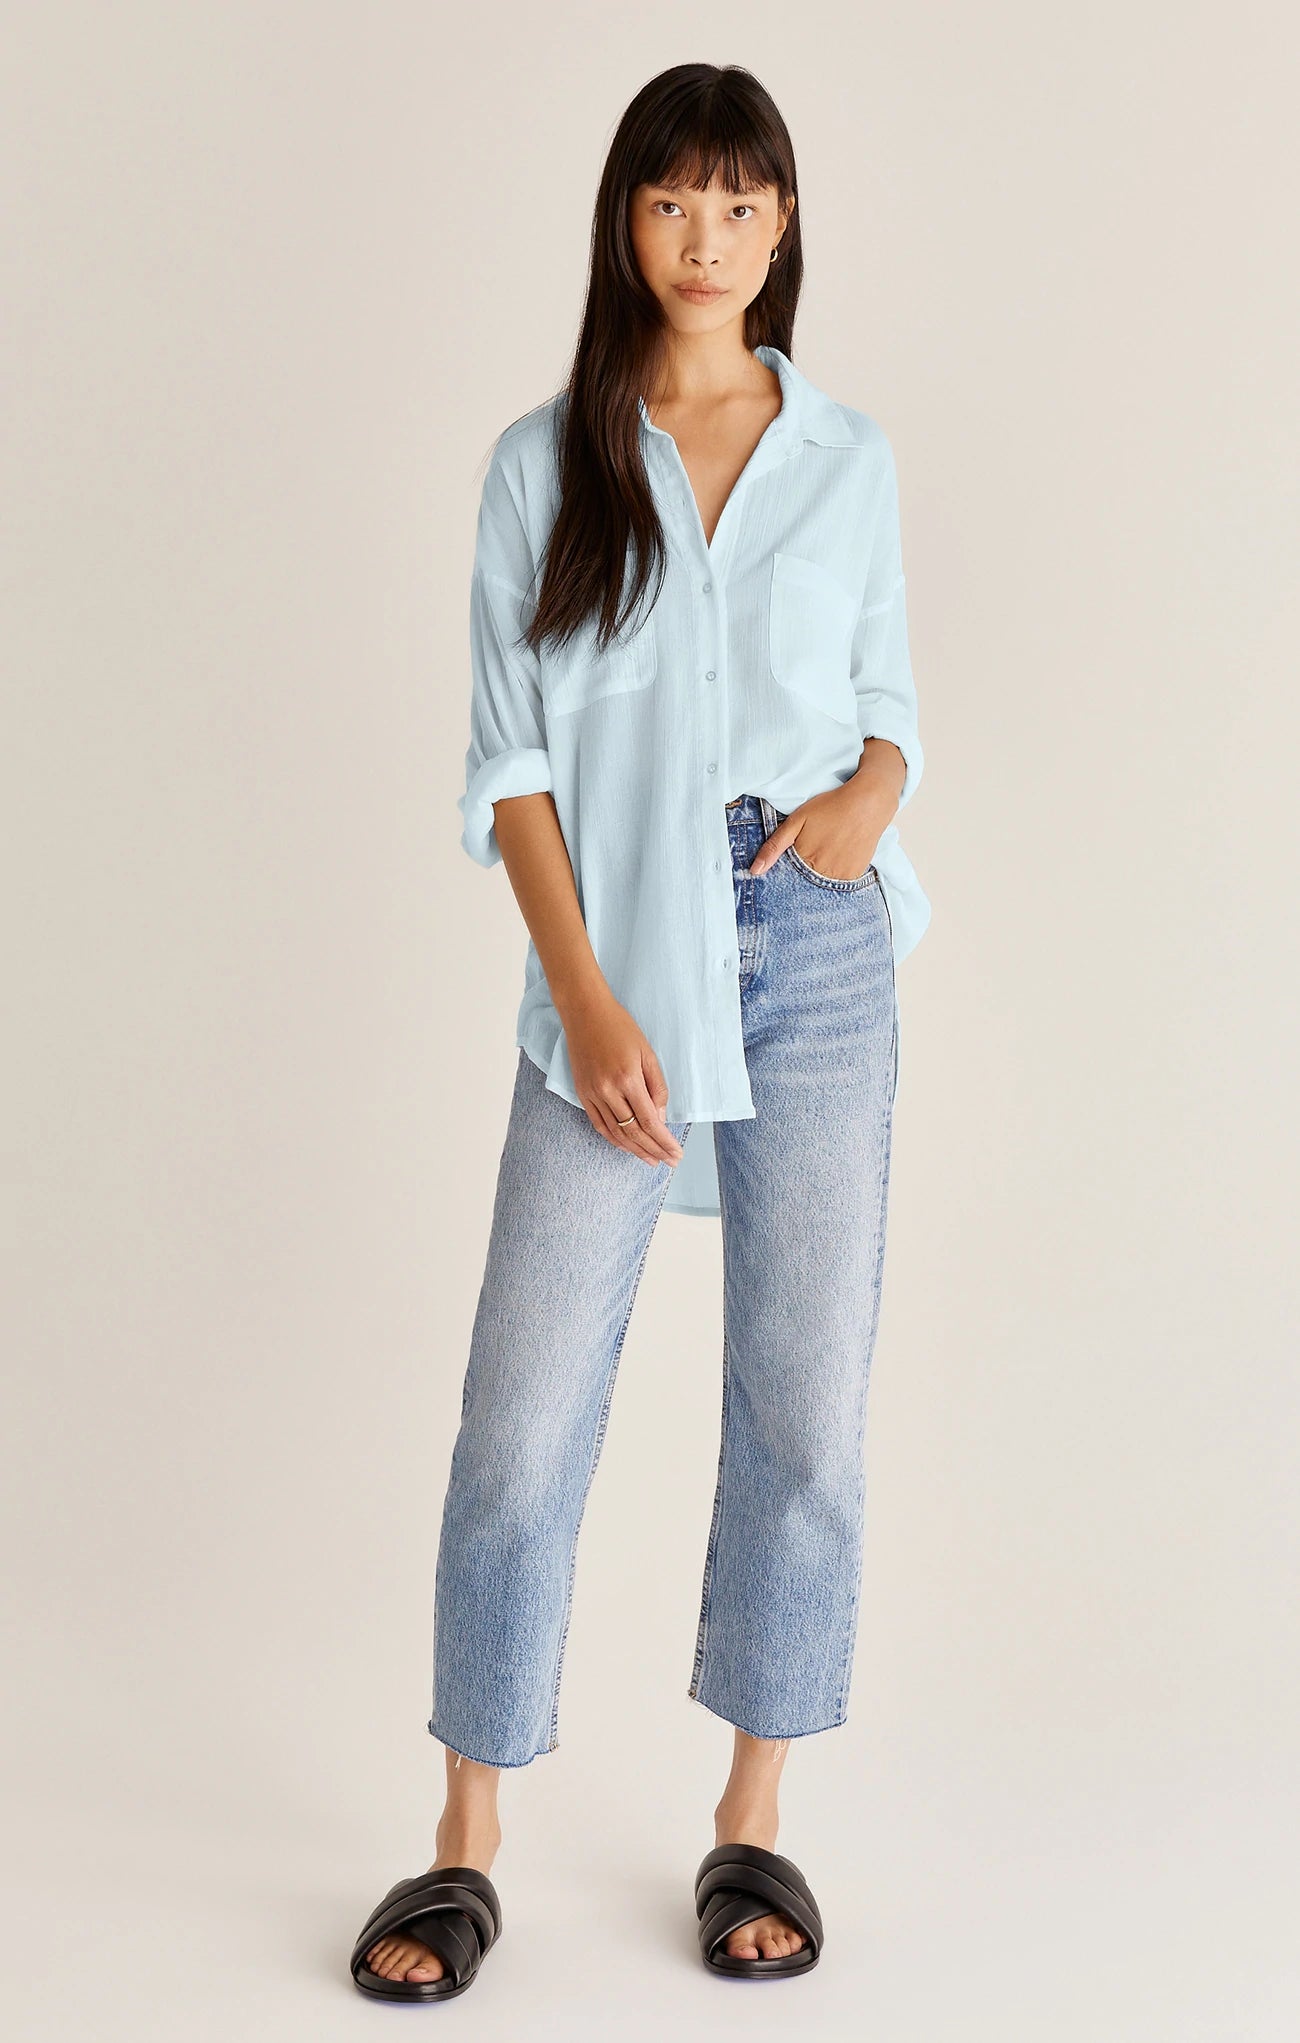 Lalo Button Up Top